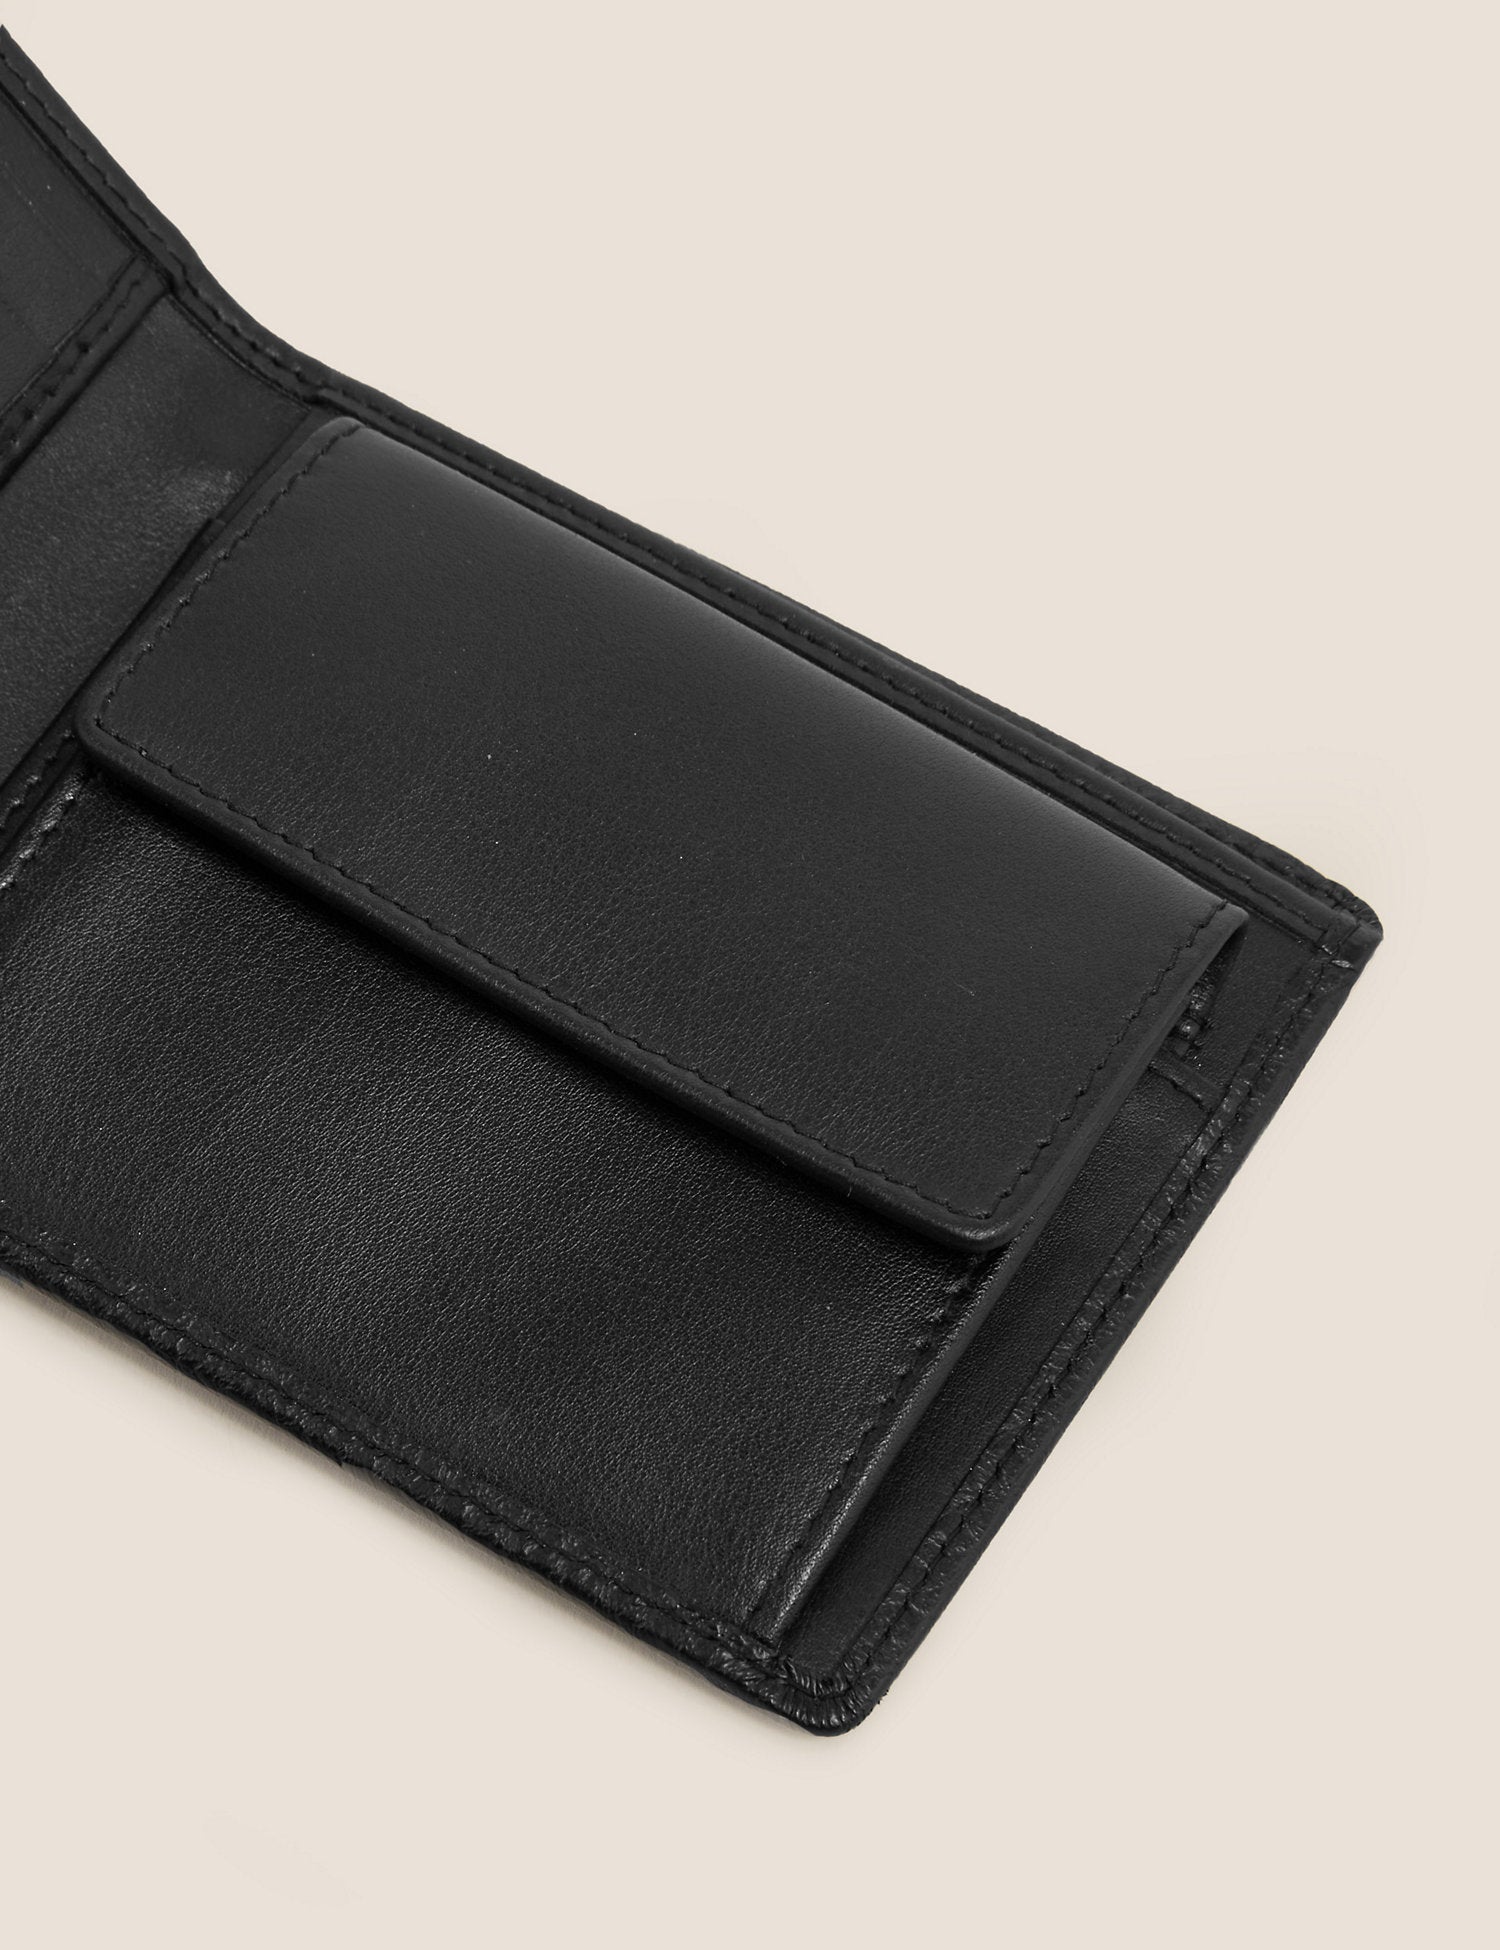 Leather Phone Bag | M&S Collection | M&S